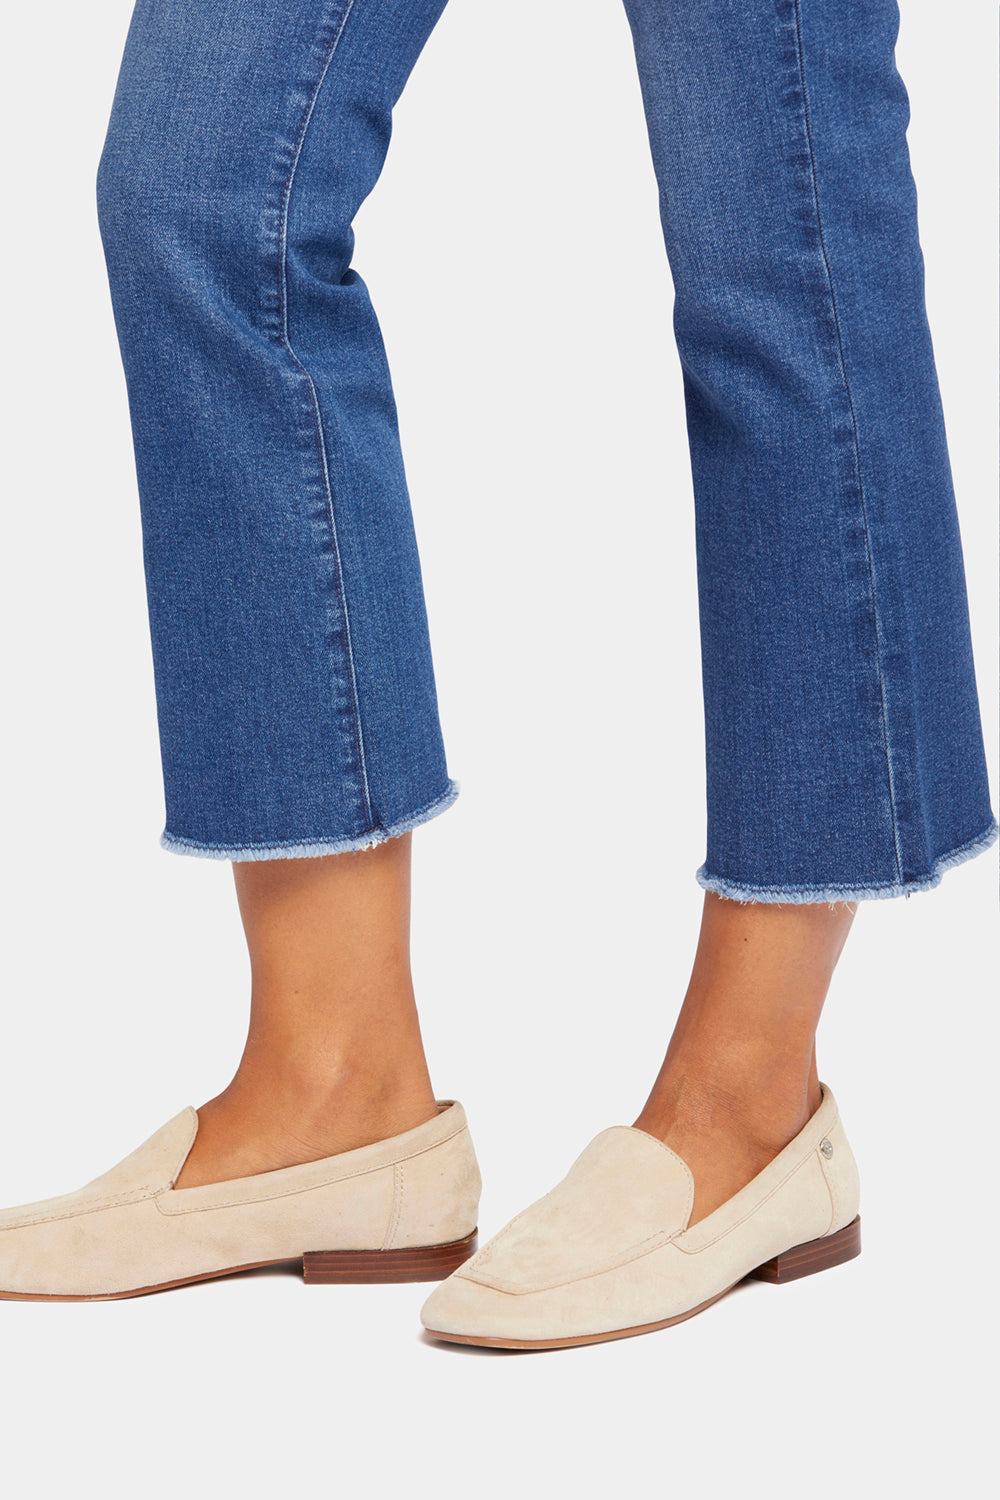 NYDJ Slim Bootcut Ankle Jeans With High Rise And Frayed Hems - Desire